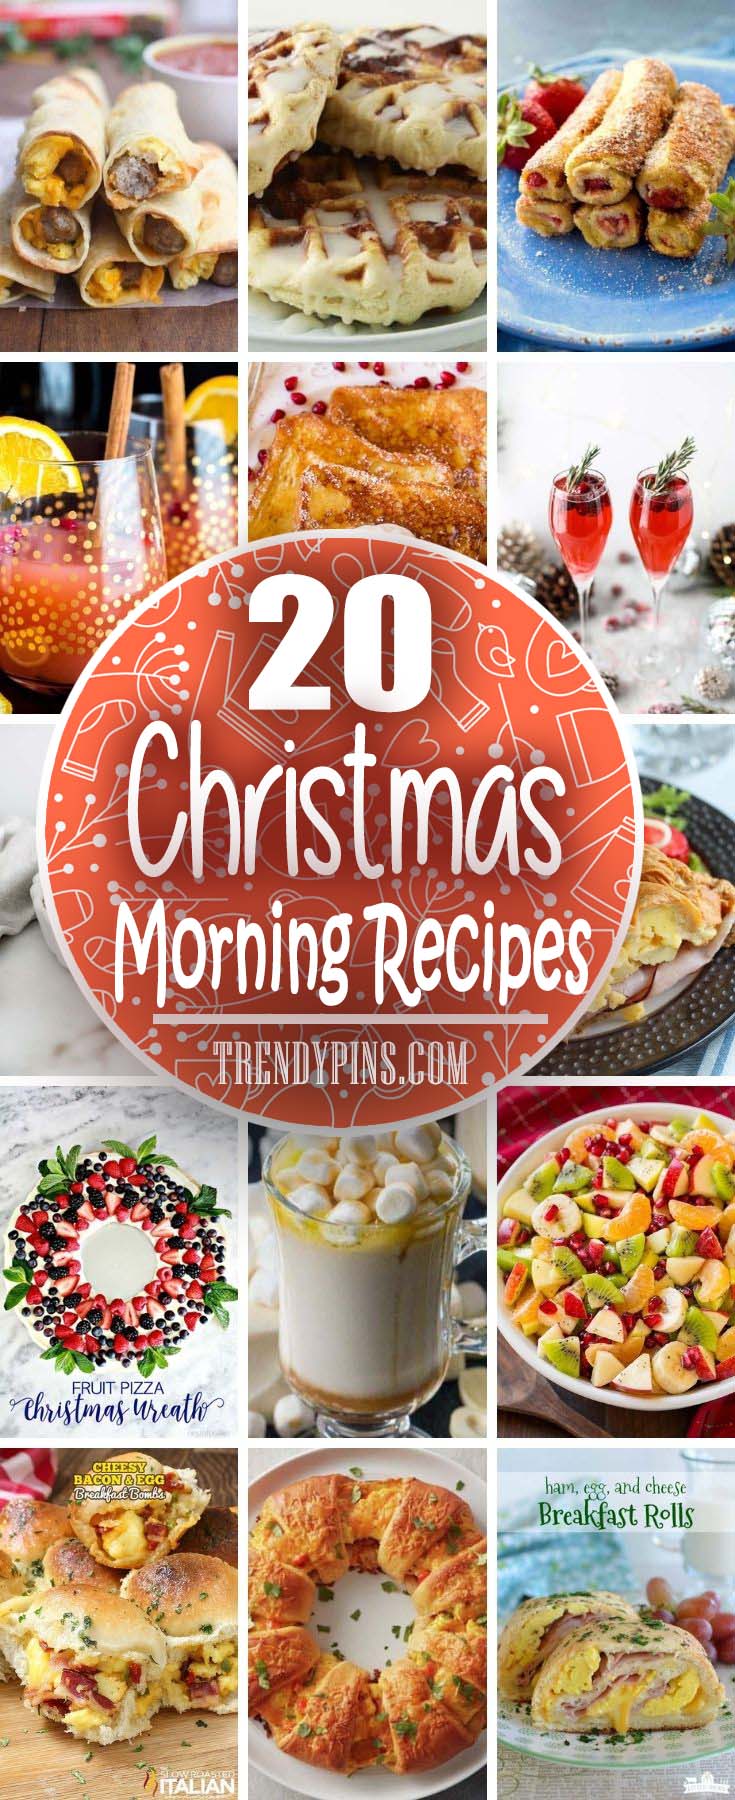 19 Christmas Breakfast Sandwiches and Other Christmas Morning Recipes